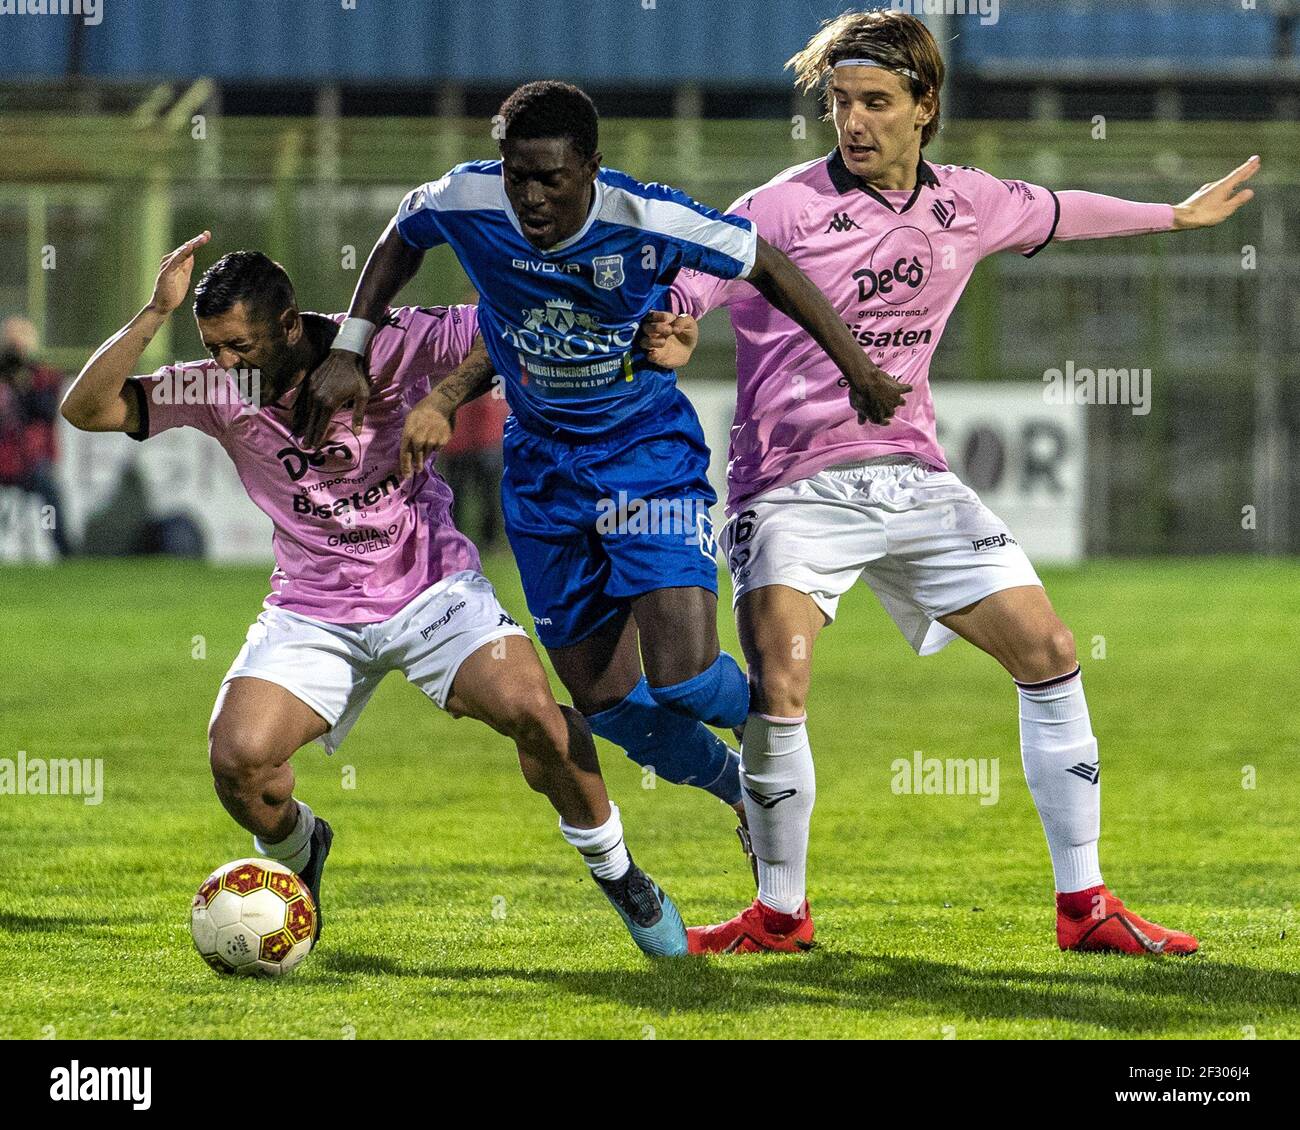 Pagani, Italy. 13th Mar, 2021. The coach Giacomo Filippi Palermo Football  Club.Serie C Championship - Marcello Torre Stadium, 30th day Group C. The  match between Paganese and Palermo ends with the final